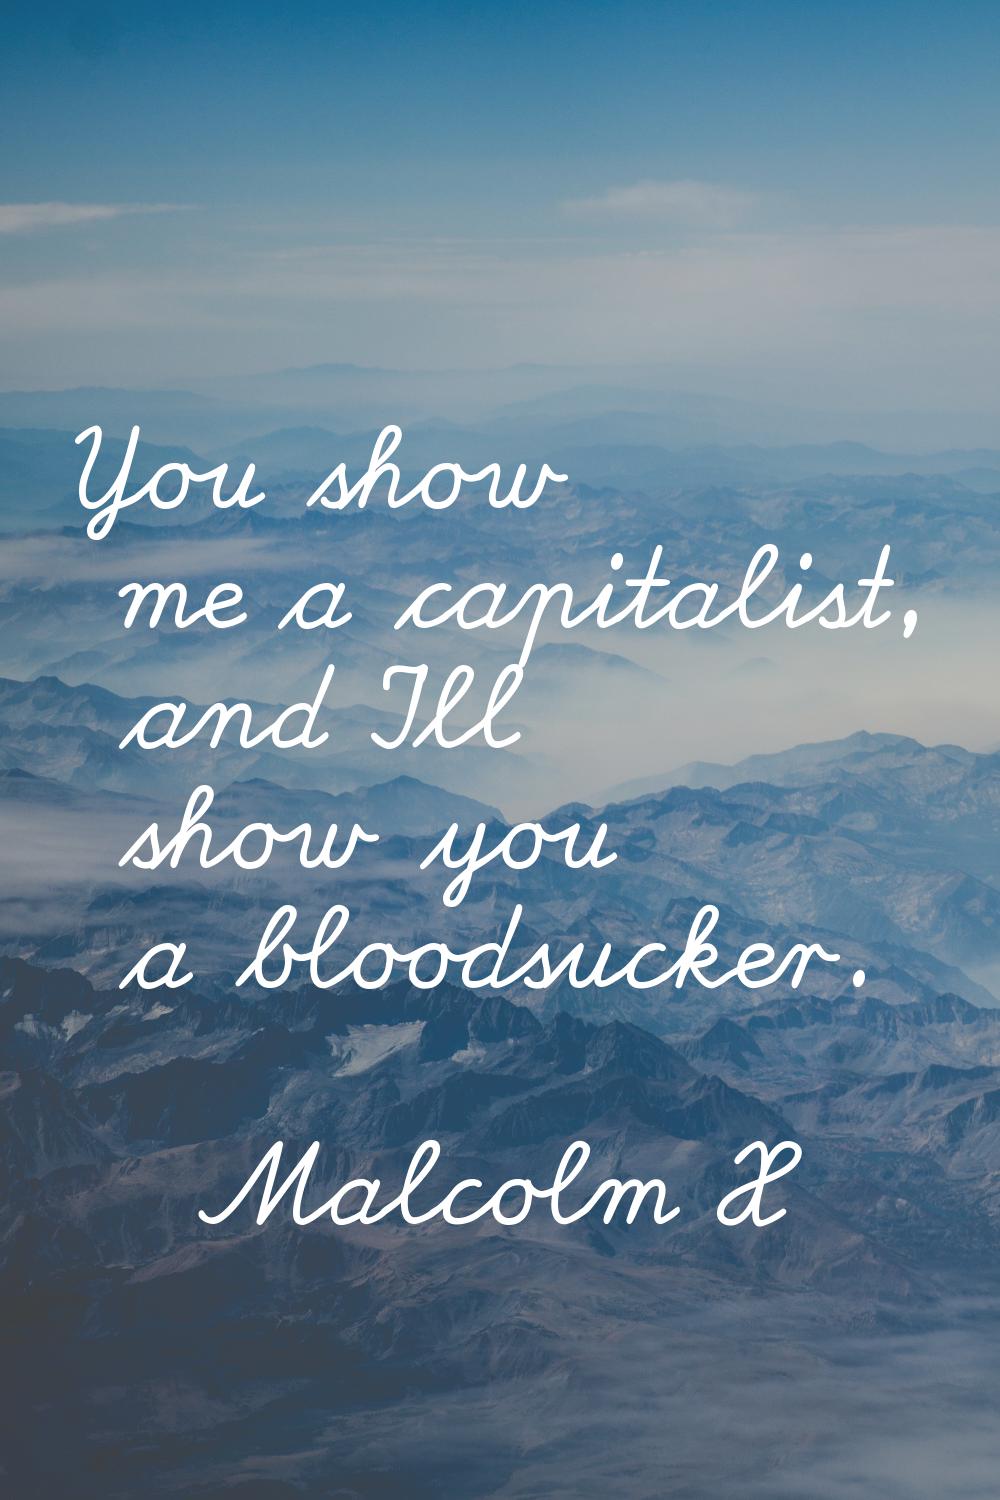 You show me a capitalist, and I'll show you a bloodsucker.